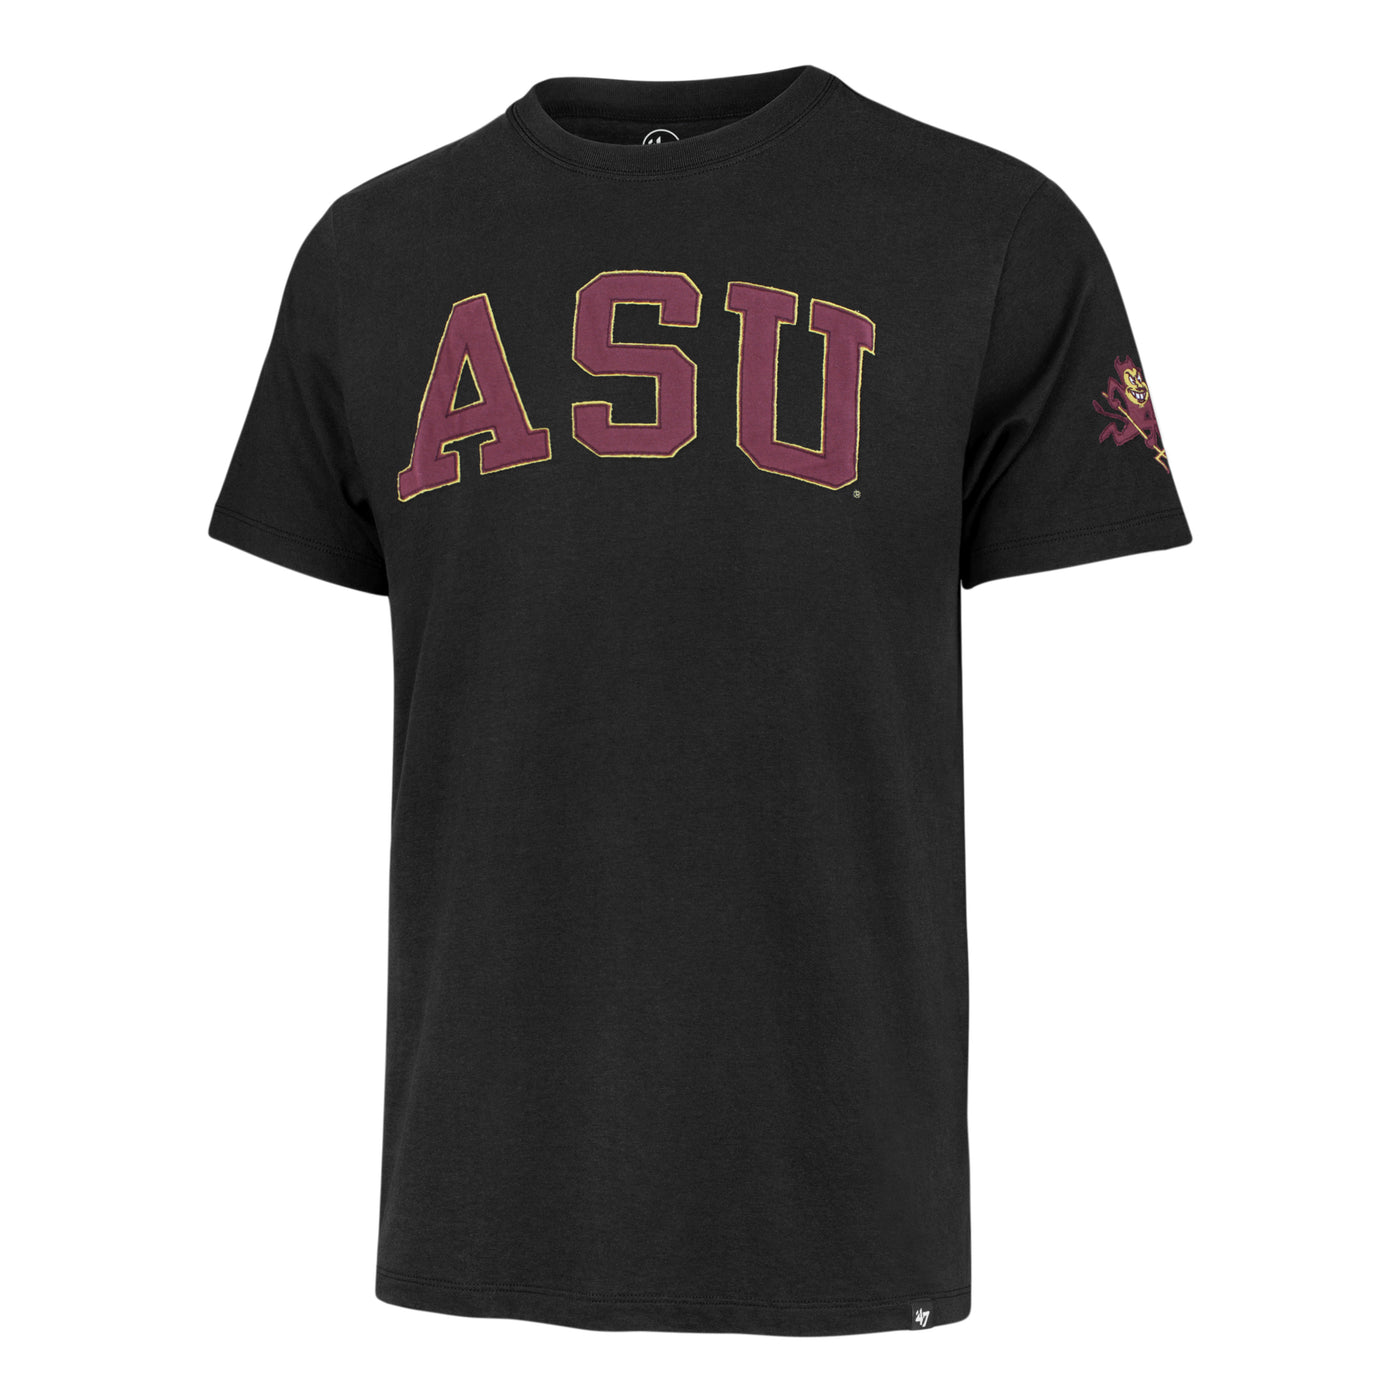 ASU black tee with 'ASU' lettering sewn into the front and a Sparky on the sleeve